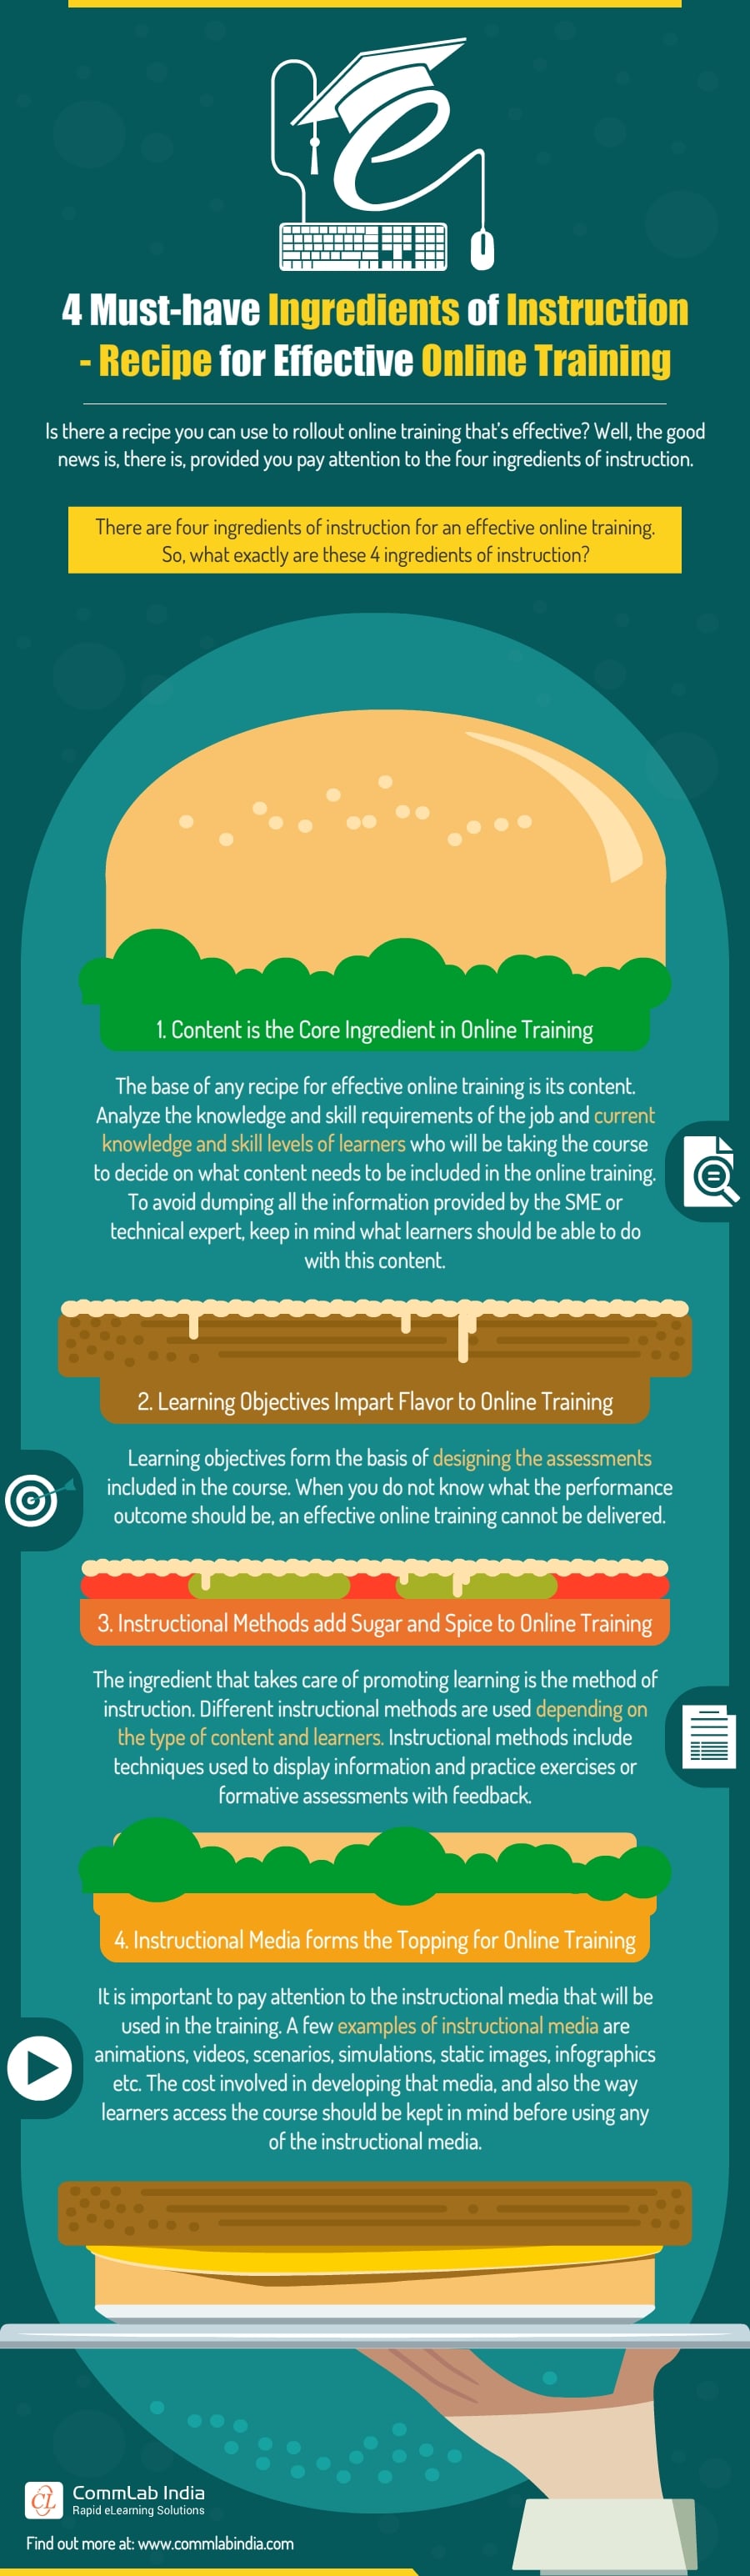 4 Ingredients of Instruction - Recipe for Effective Online Training [Infographic]